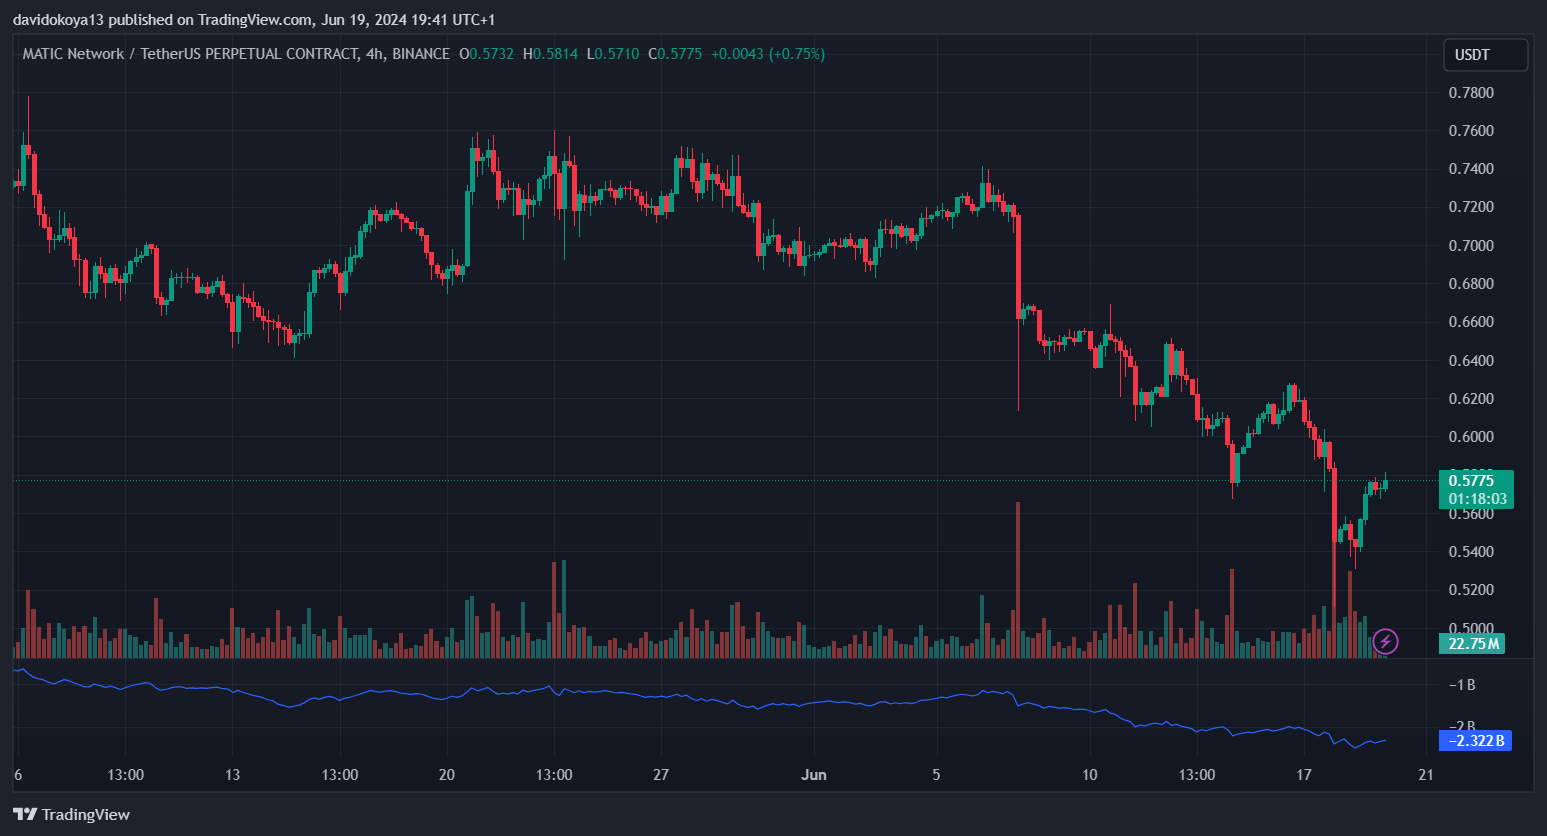 MATIC/USDT 4-hour candle chart.